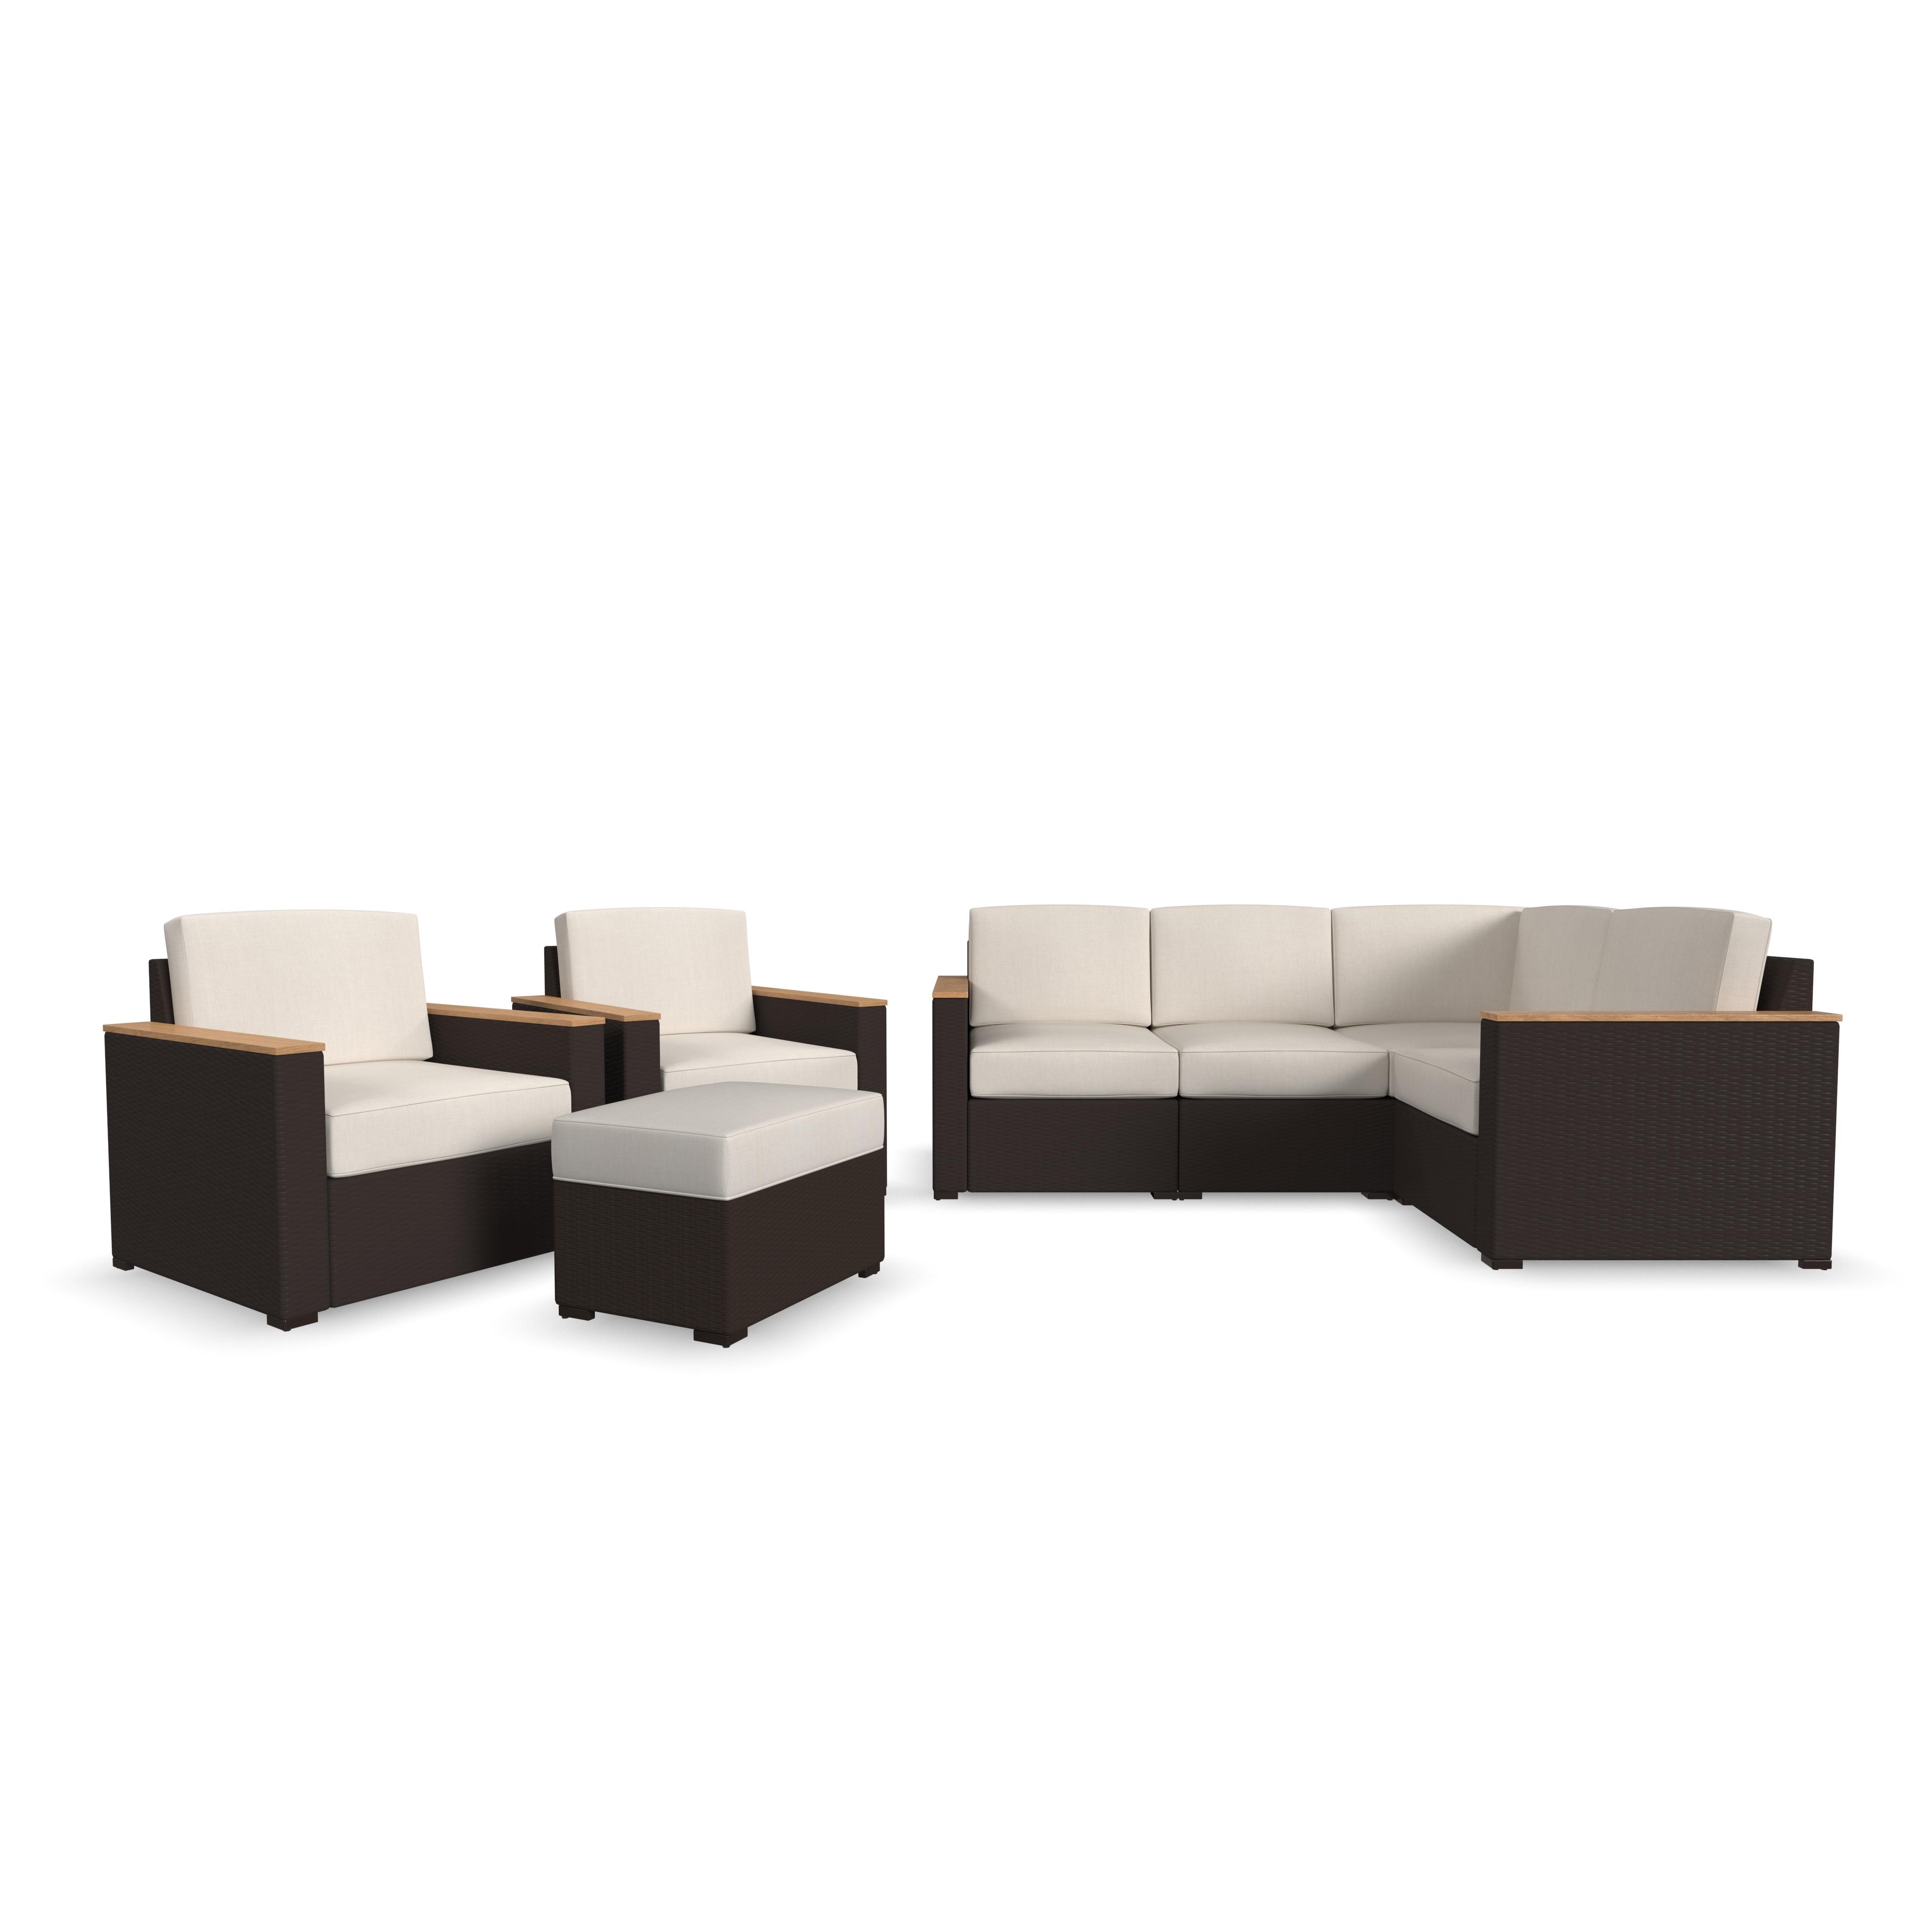 Homestyles Palm Springs Outdoor 4 Seat Sectional, Arm Chair Pair and Ottoman